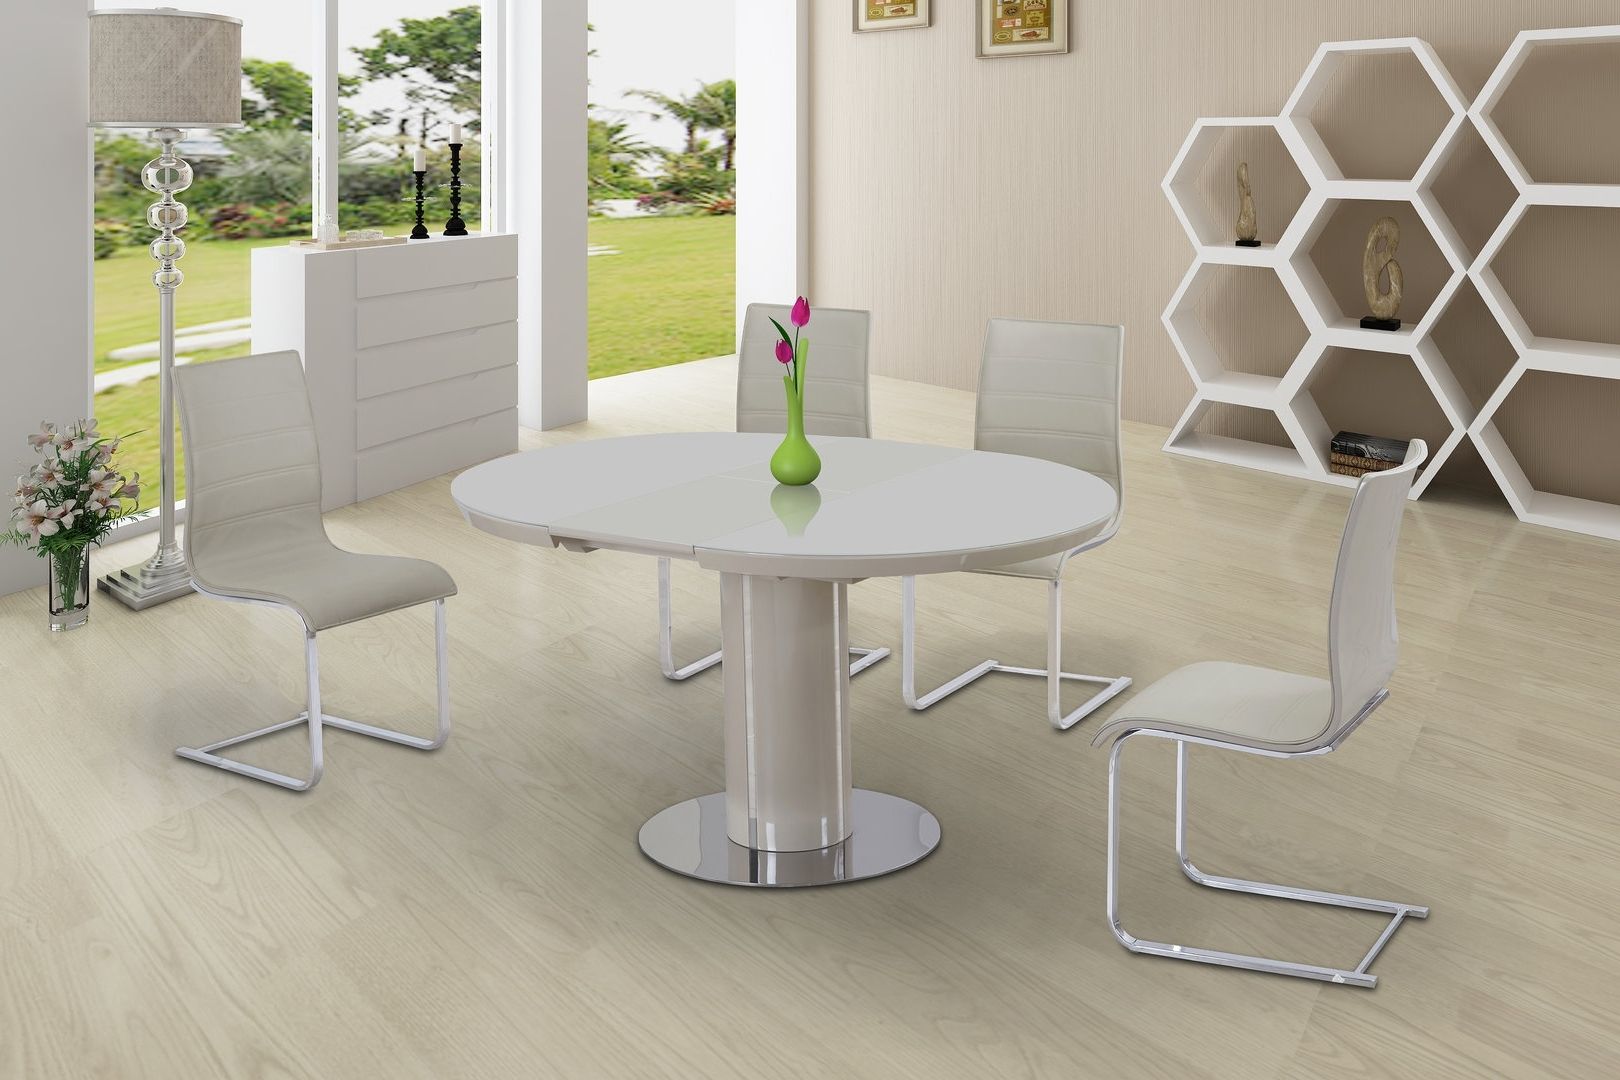 Round High Gloss Dining Tables Inside Well Known Round Cream Glass High Gloss Dining Table & 4 Chairs – Homegenies (Photo 1 of 25)